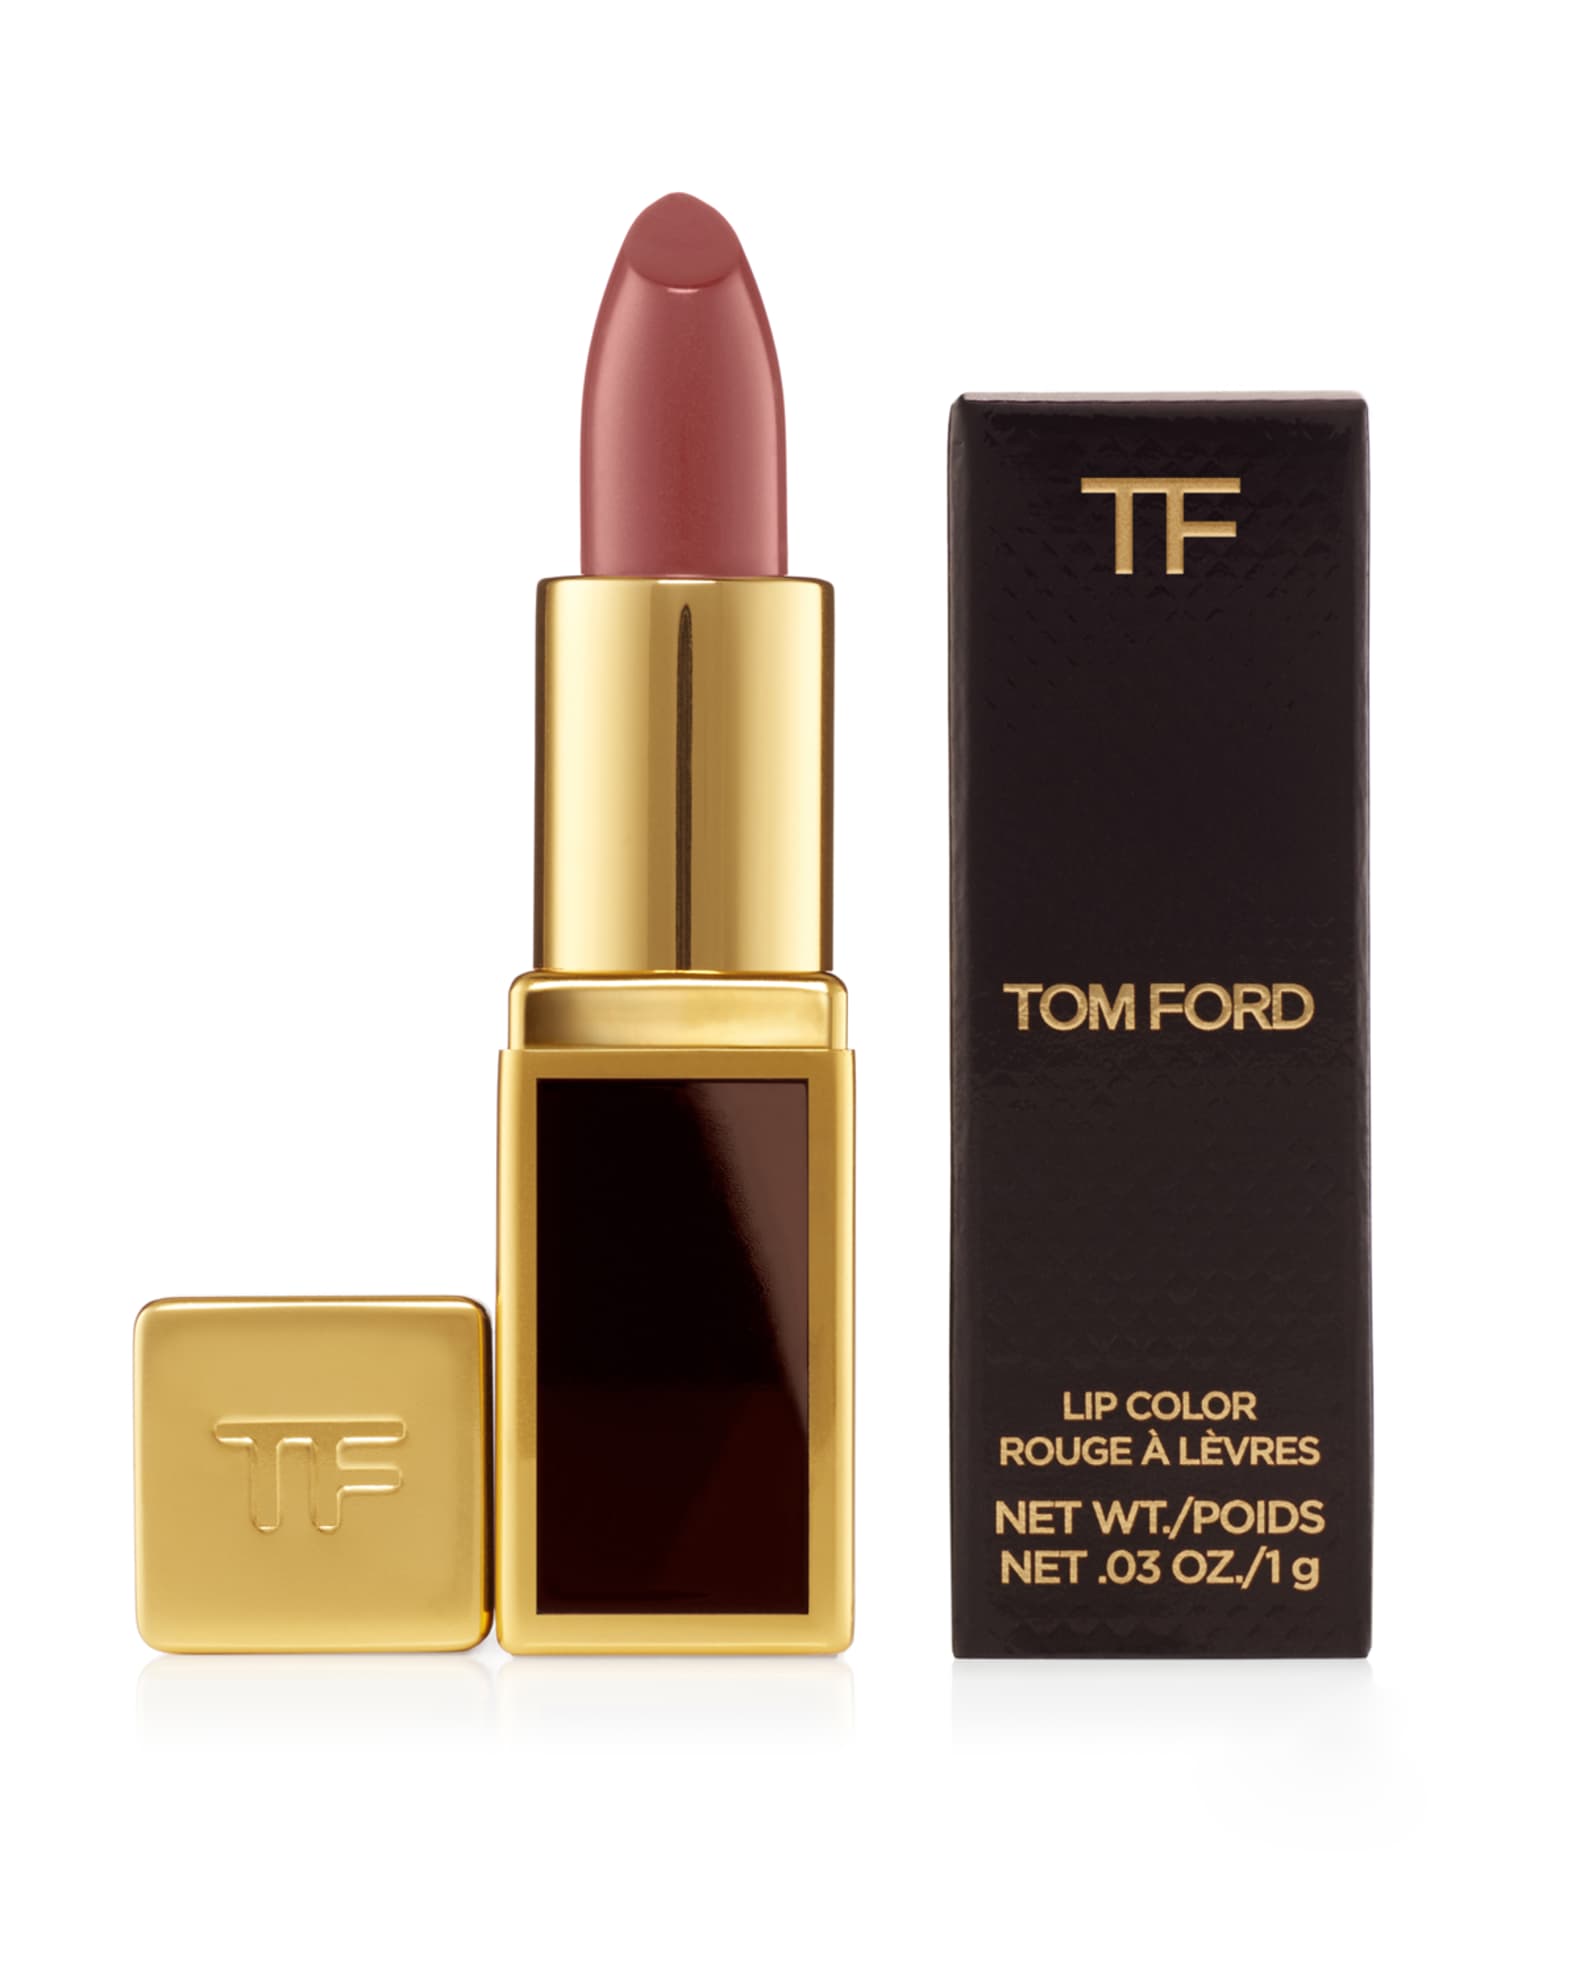 TOM FORD Mini Lip Color Casablanca, Yours with any Tom Ford Beauty Purchase  | Neiman Marcus